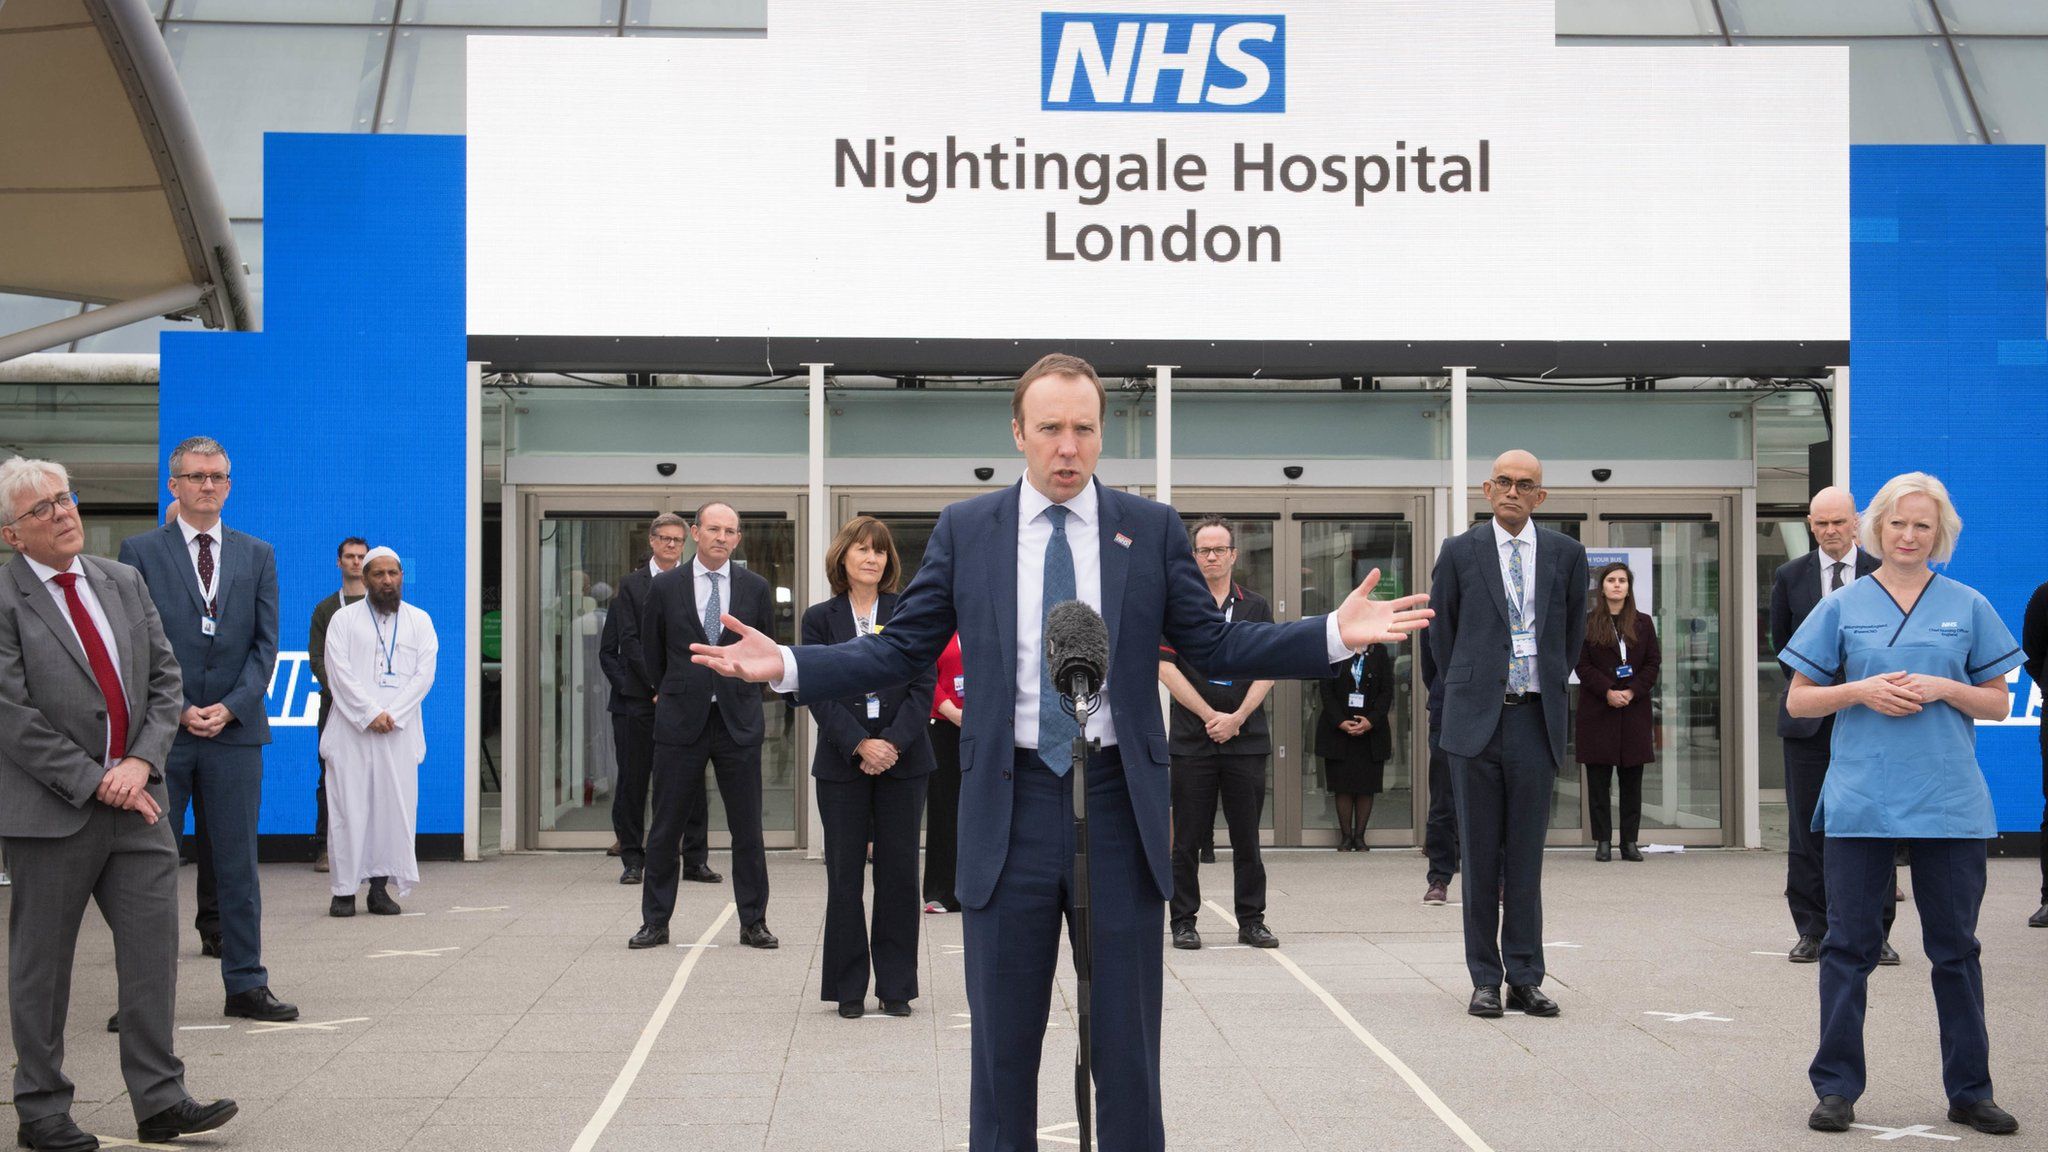 Health Secretary, Matt Hancock at the opening of the NHS Nightingale Hospital at the ExCel centre in London, a temporary hospital with 4000 beds which has been set up for the treatment of Covid-19 patients.